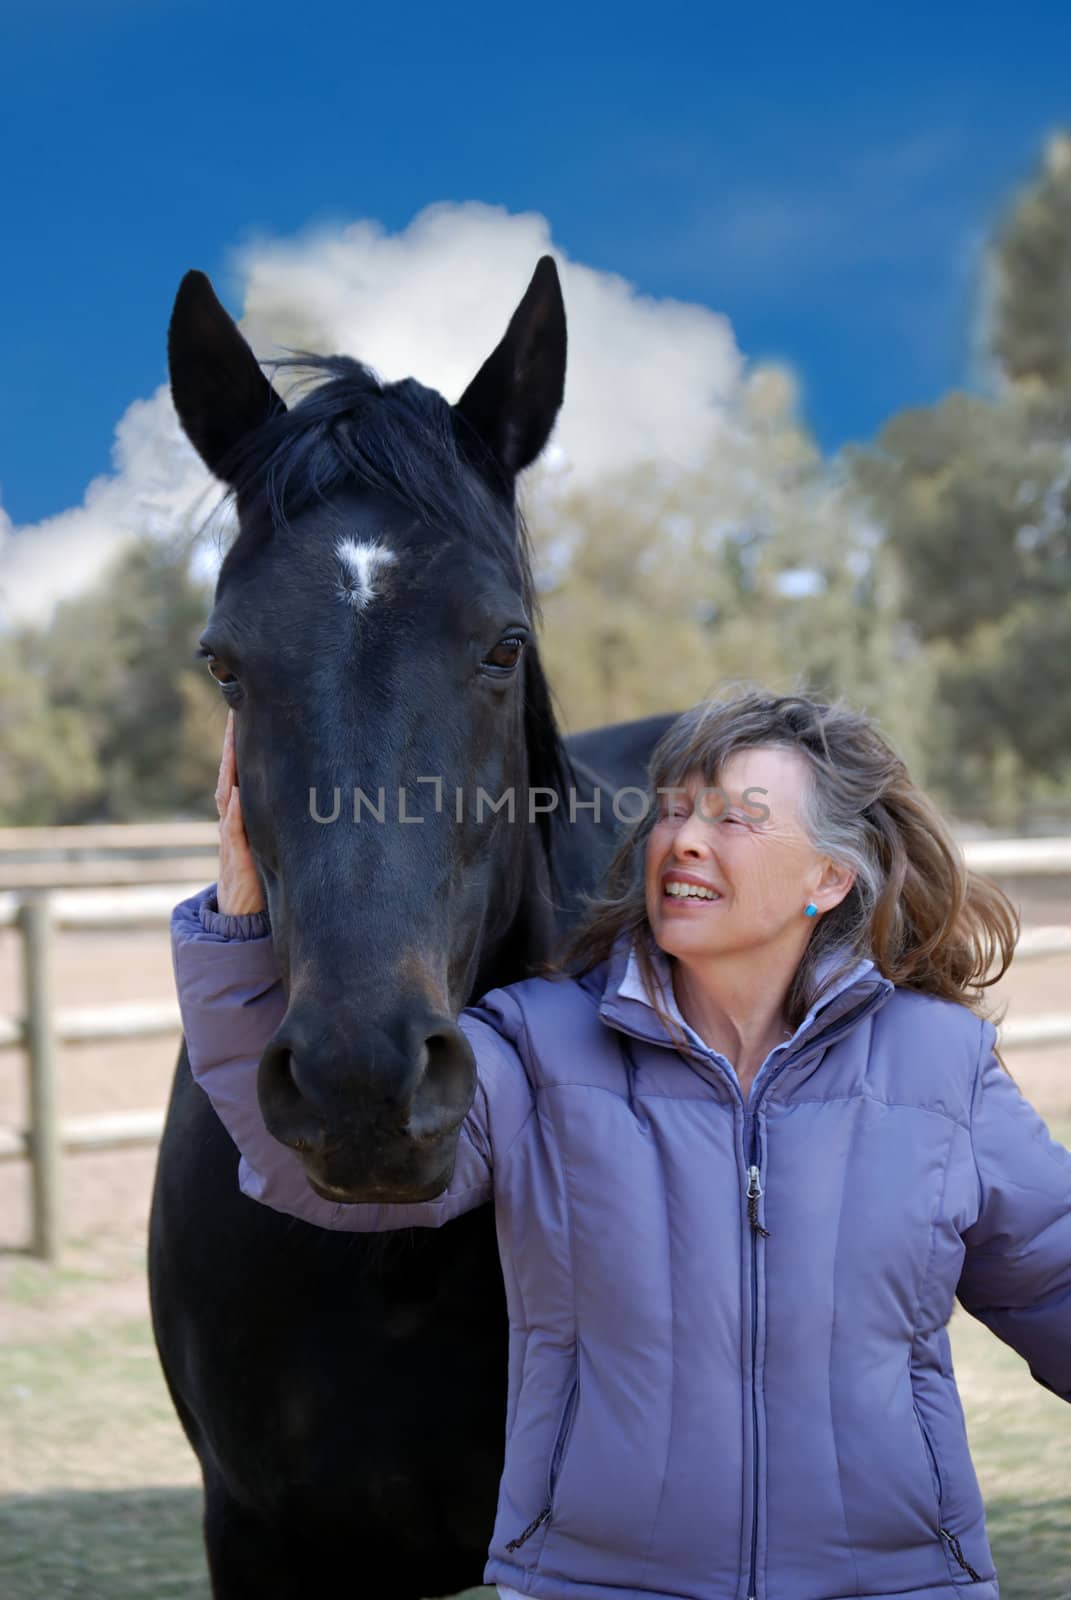 Vertical image of a woman of the Baby Boomer era smiling broadly at her beautiful black horse, against a blue cloudy sky.